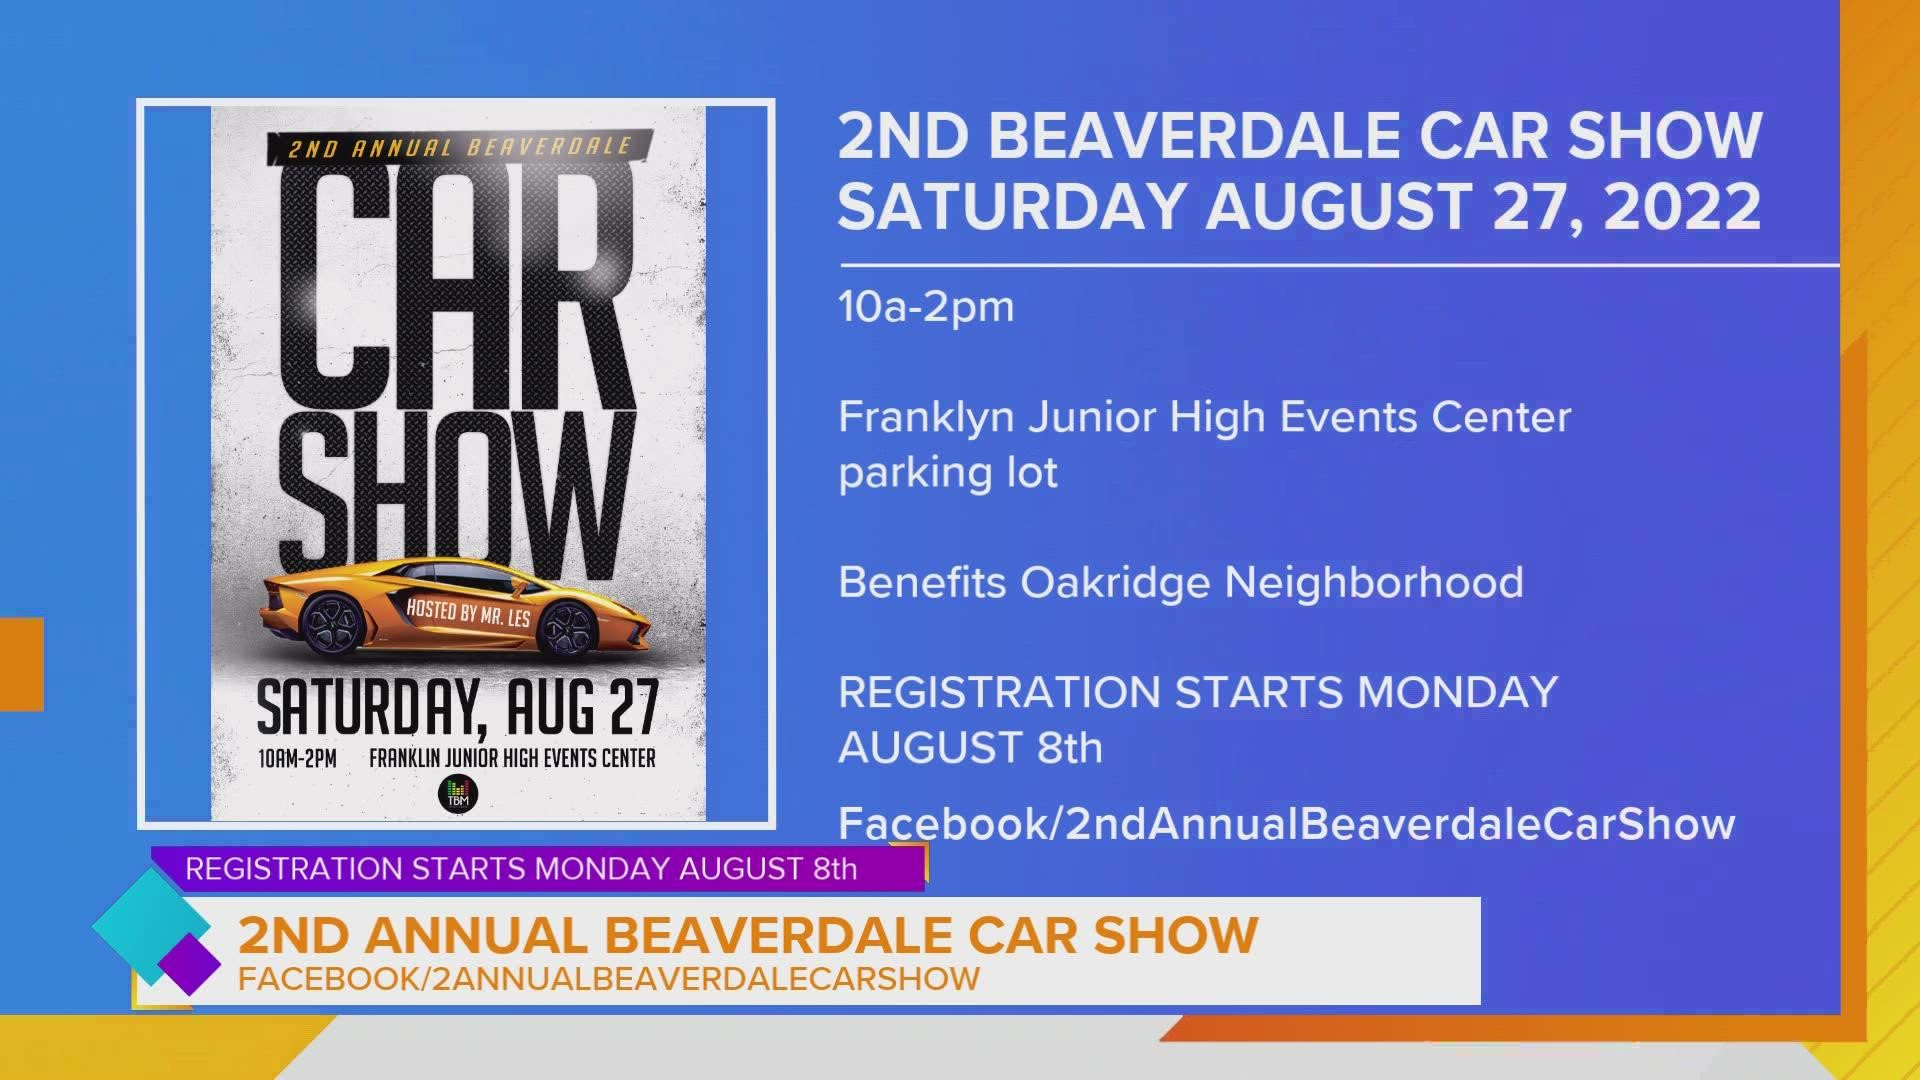 Les Mwirichia visits about the 2nd Annual Beaverdale Car Show happening Saturday August 27th that will benefit the Oakridge Neighborhood. Registration begins Aug 8th